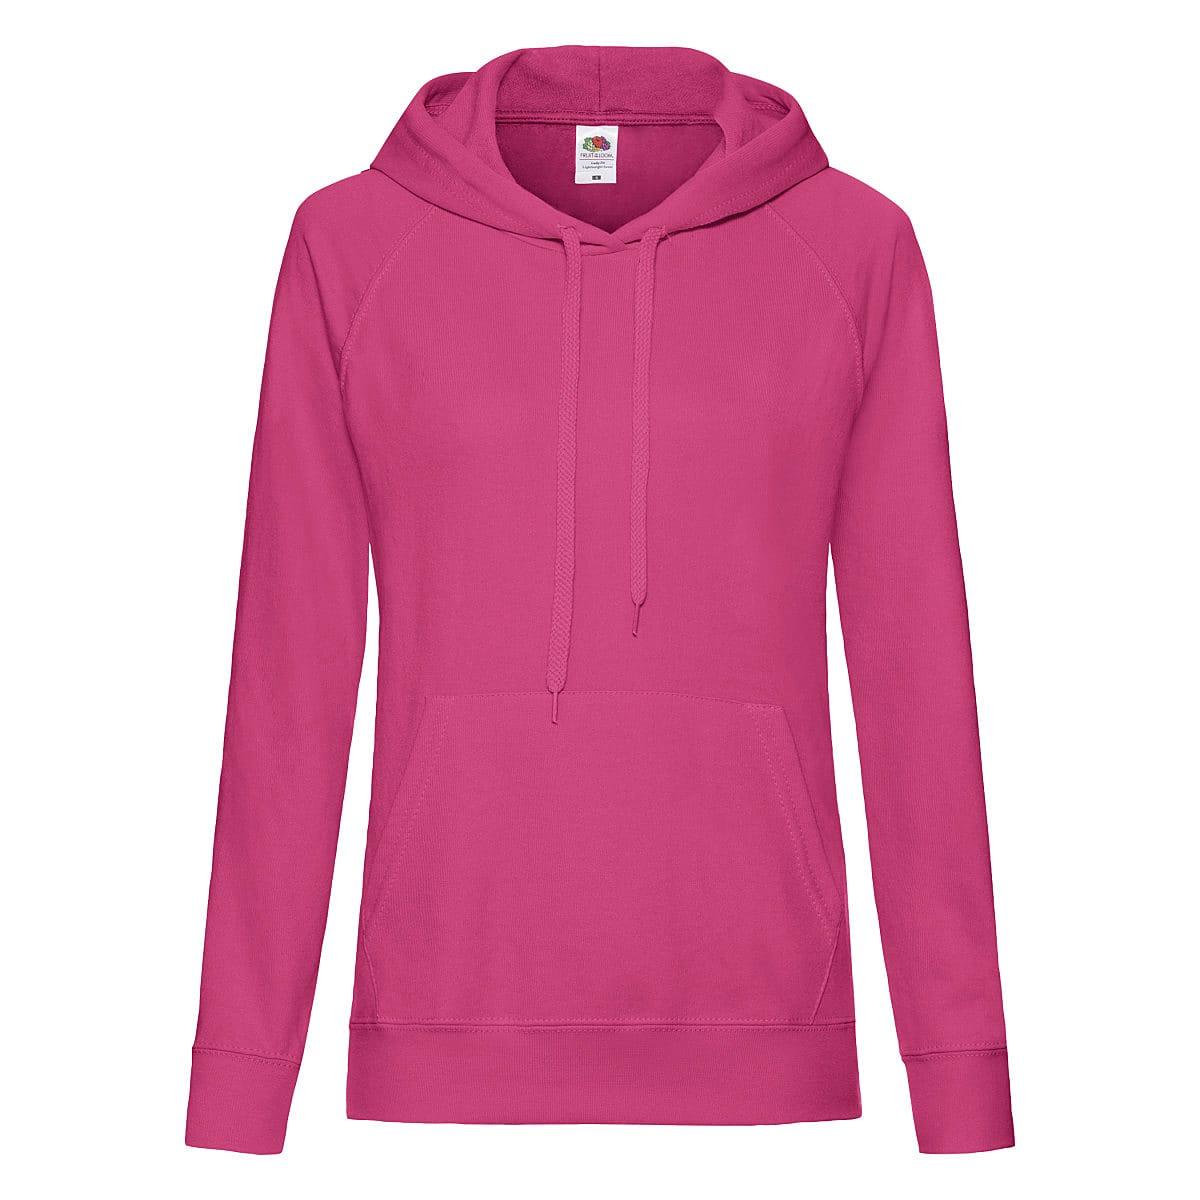 Fruit Of The Loom Lady-Fit Lightweight Hoodie in Fuchsia (Product Code: 62148)